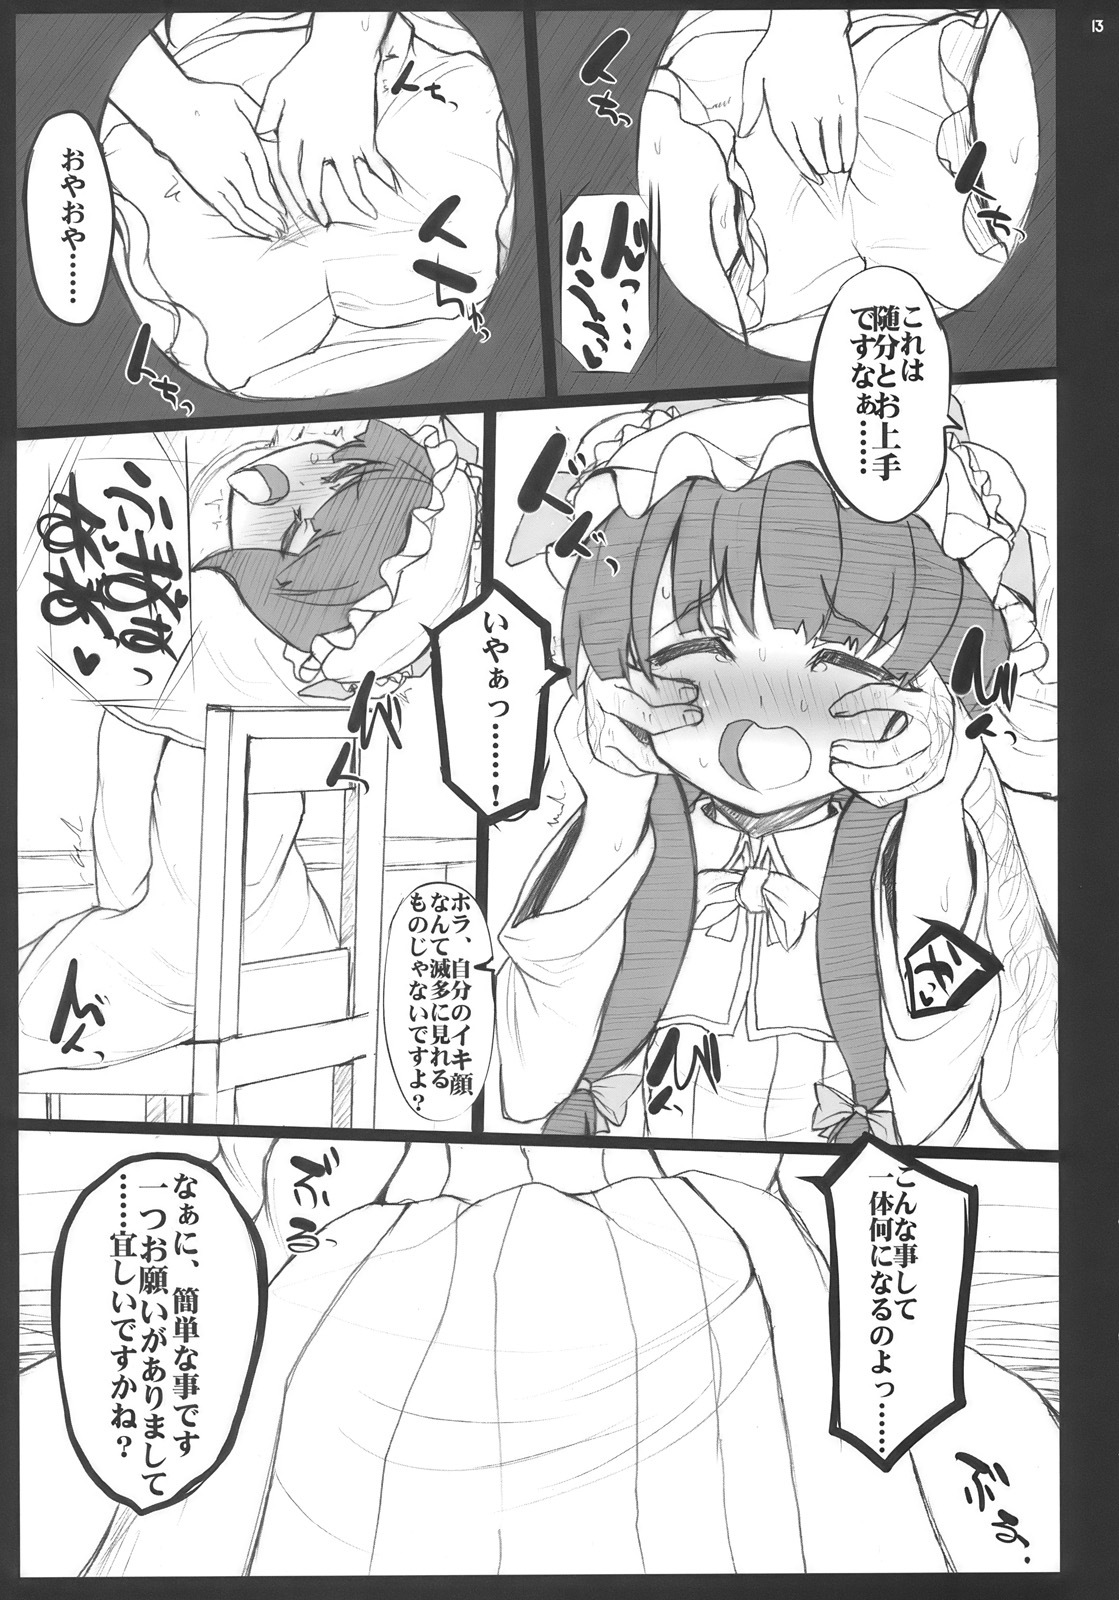 (Reitaisai 7) [INST (interstellar)] ONE CUT EXTINGUISHER (Touhou Project) page 13 full